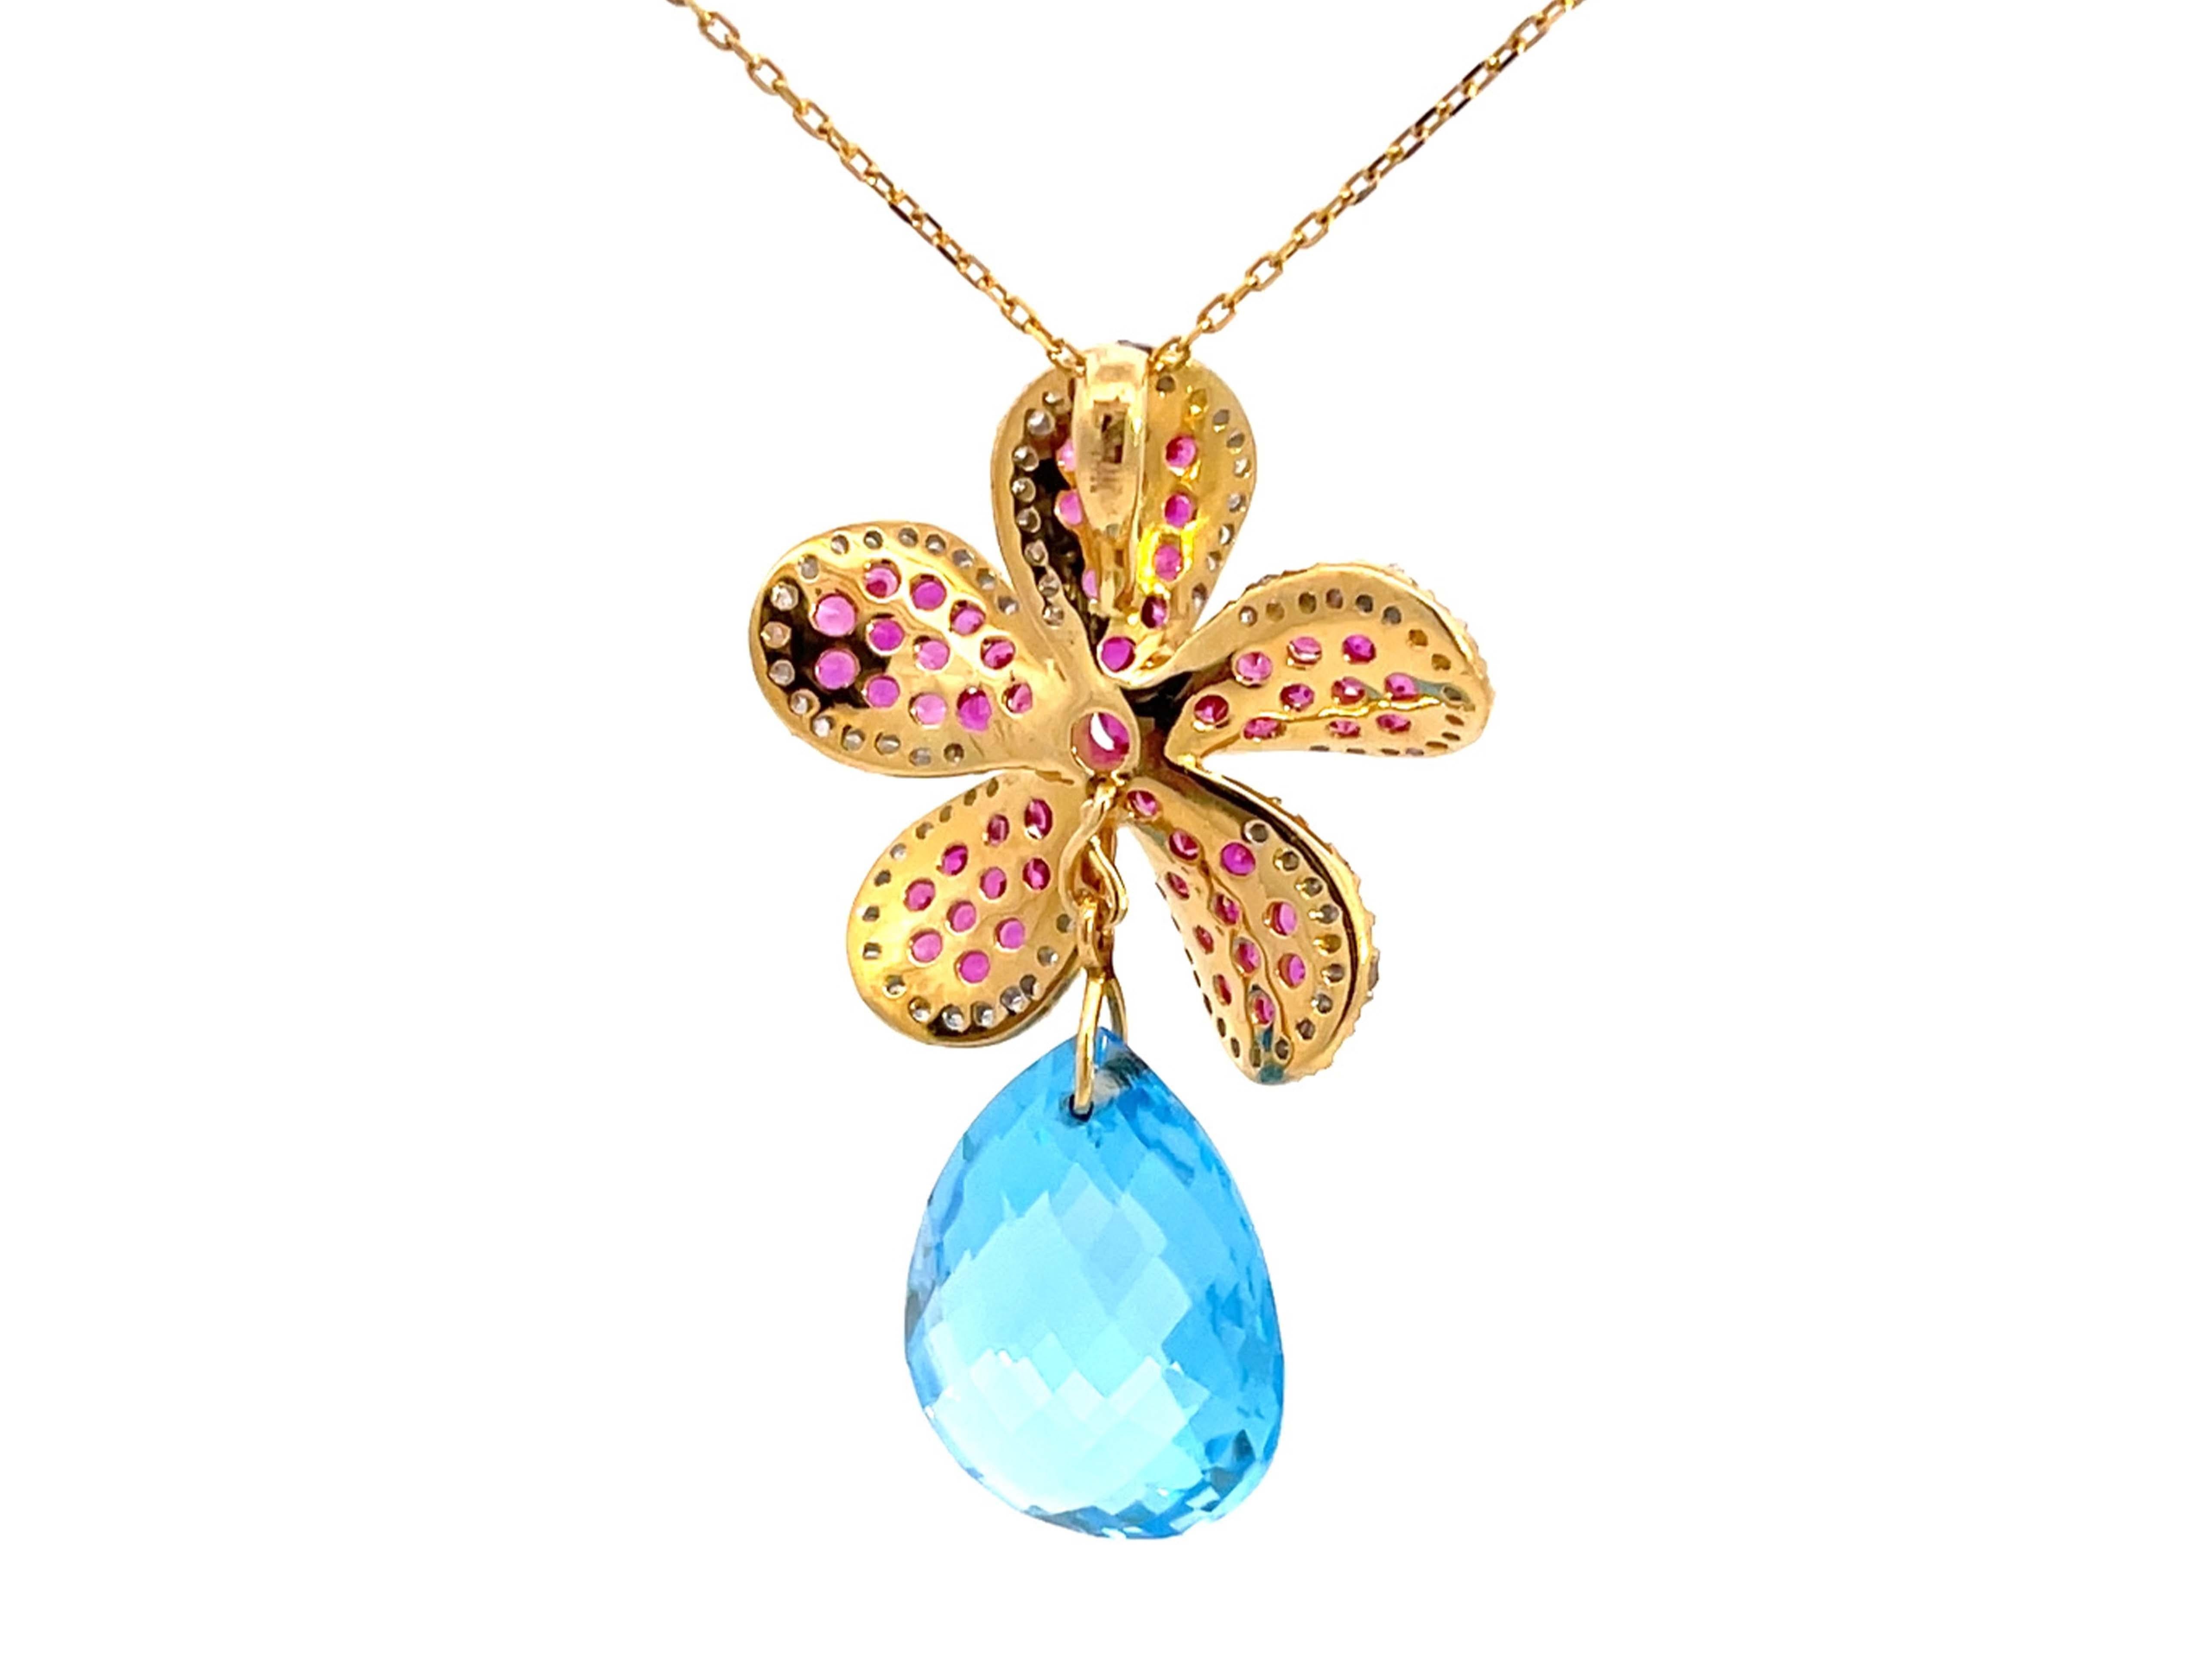 Ruby Diamond Flower Necklace with Topaz Drop in 14k Yellow Gold For Sale 1